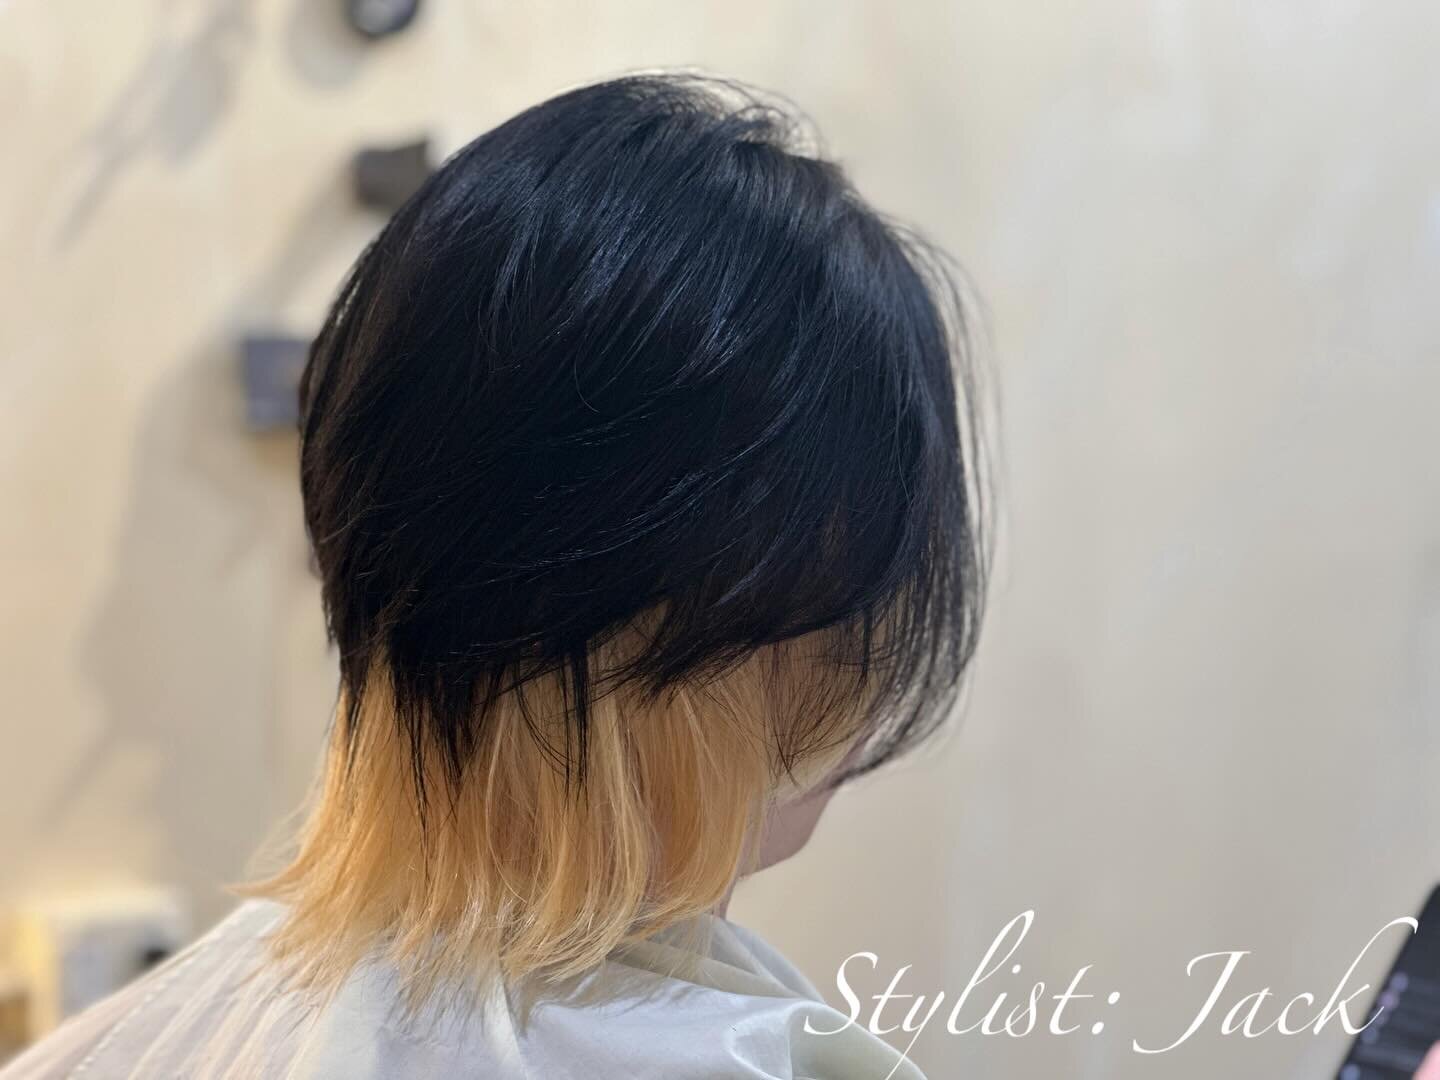 Double Process Color + Cut
Stylist: Jack

Blonde Inner Color 🟡⚫️

We offer: cuts, perms (cold, digital, straightening), coloring, and treatments! 💇🏻&zwj;♀️💇🏻💆🏻&zwj;♂️💆🏼&zwj;♂️✂️

Looking forward to seeing you soon!